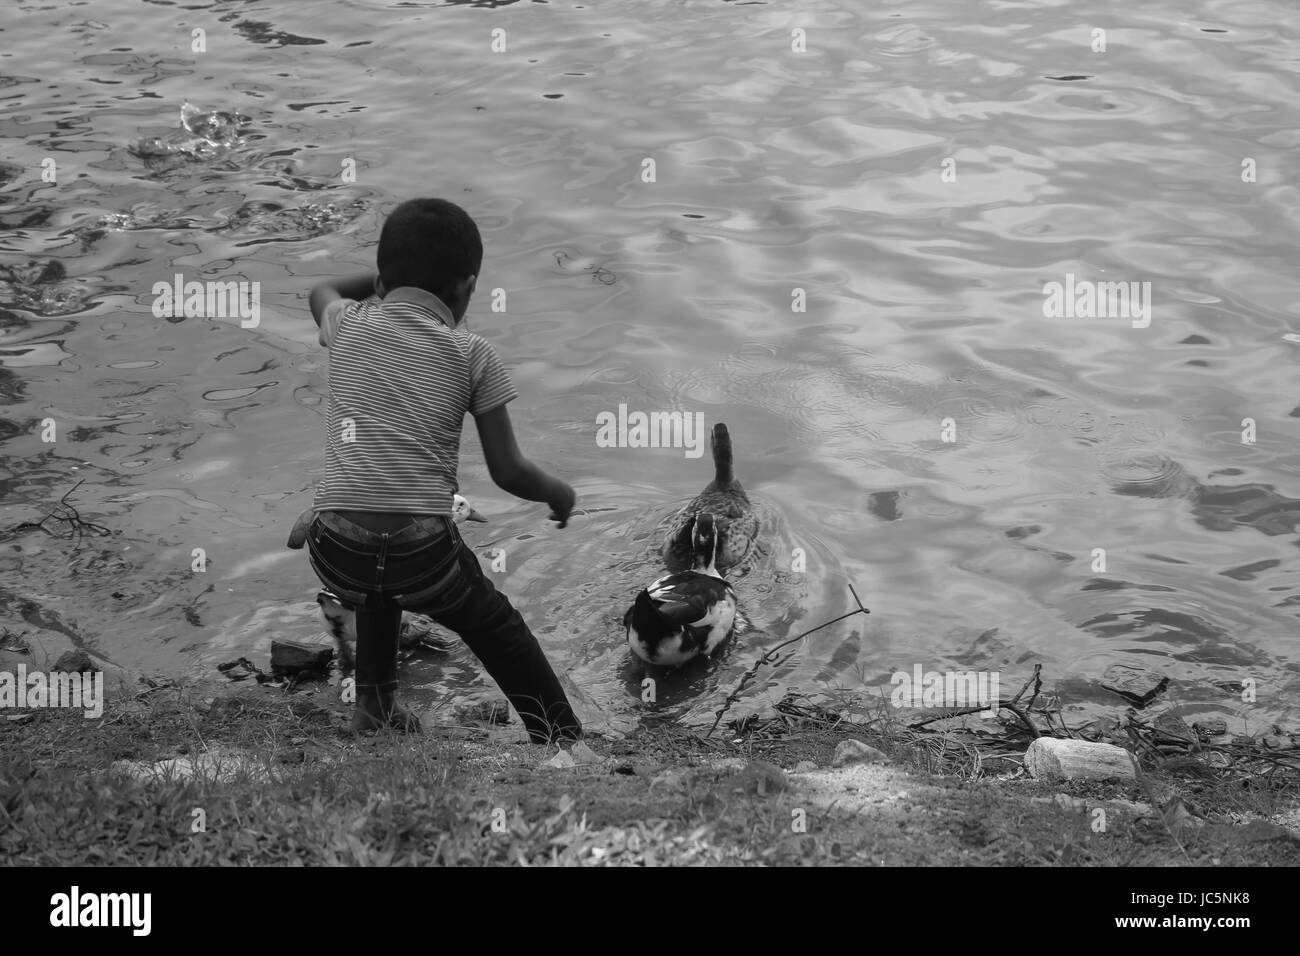 Young child reaching out to ducks in water Stock Photo